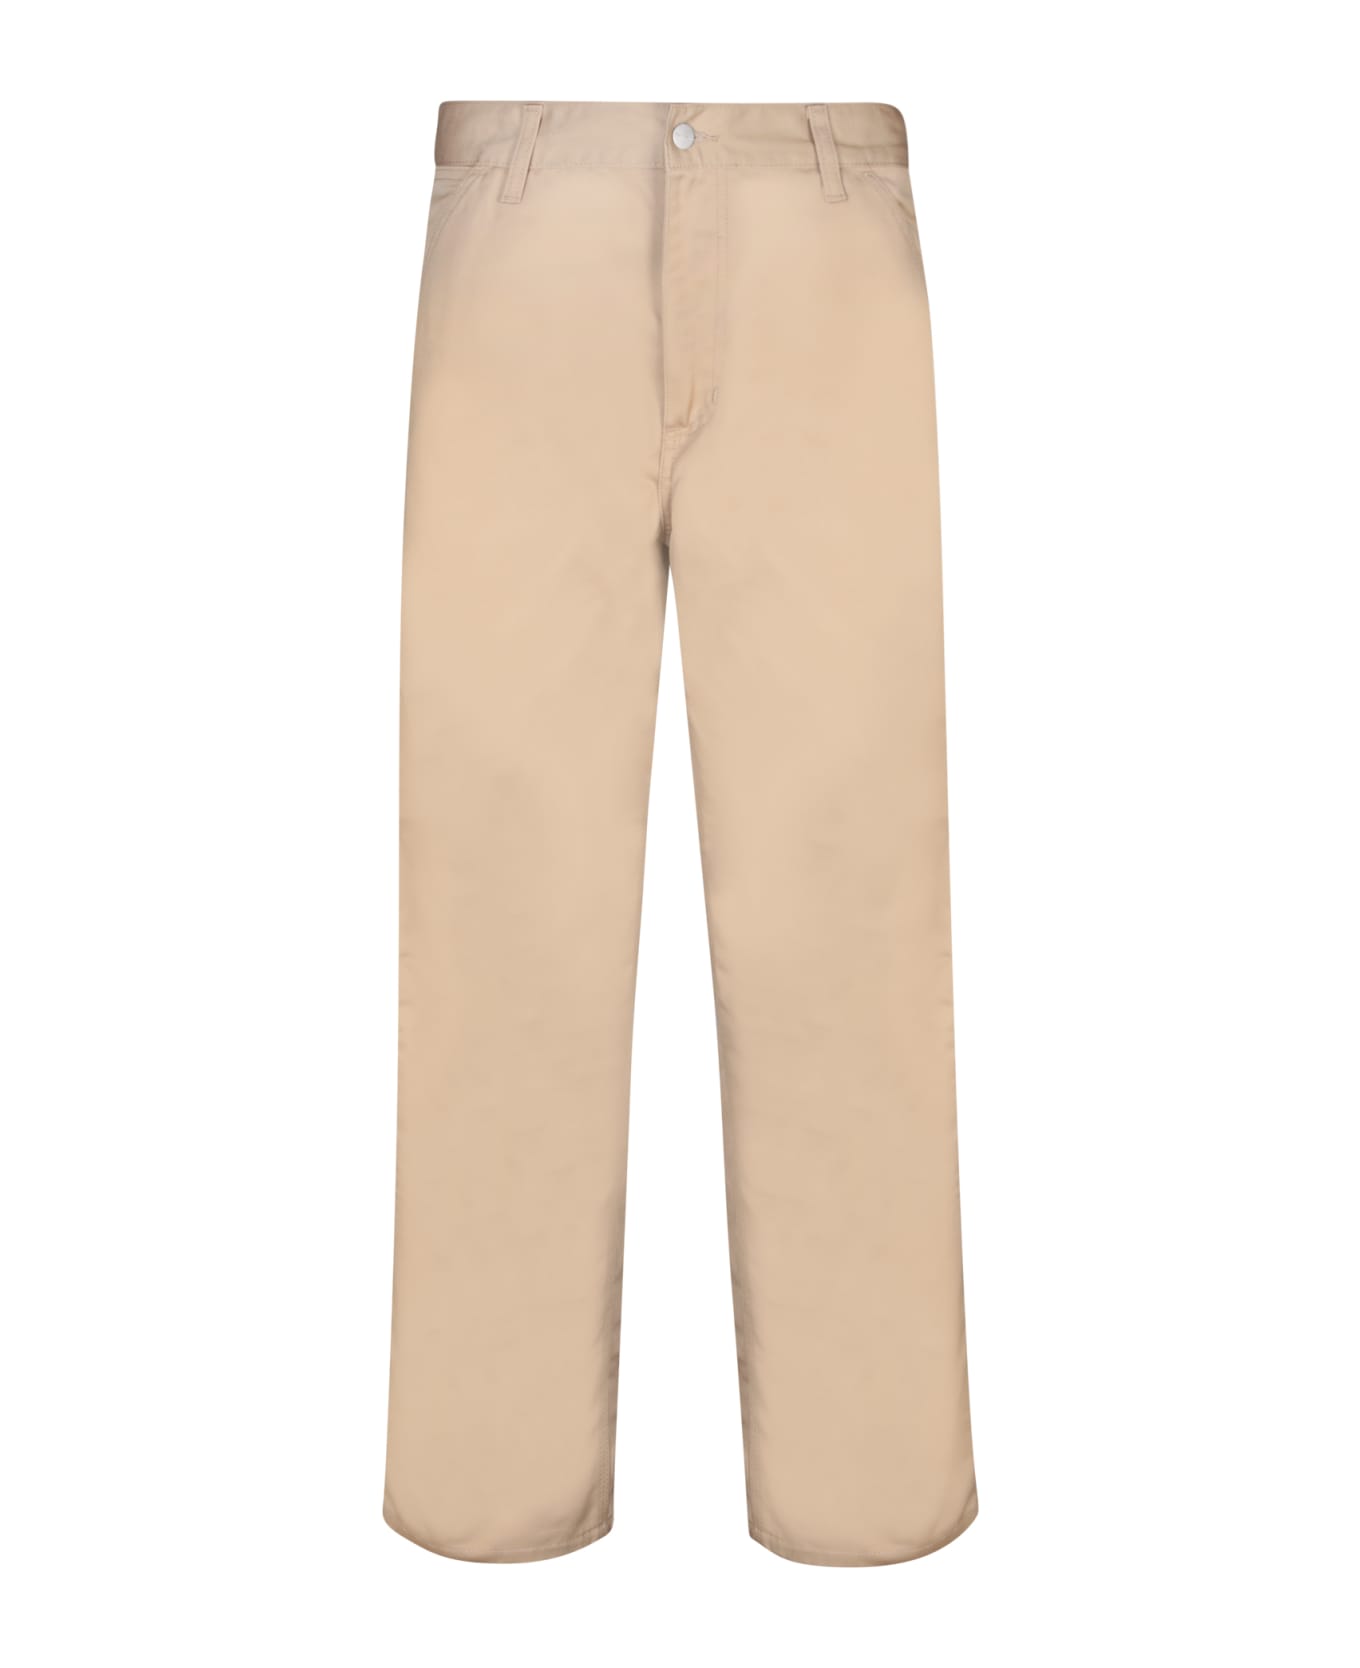 Carhartt Beige Polyester Blend Simple Pant - SABLE